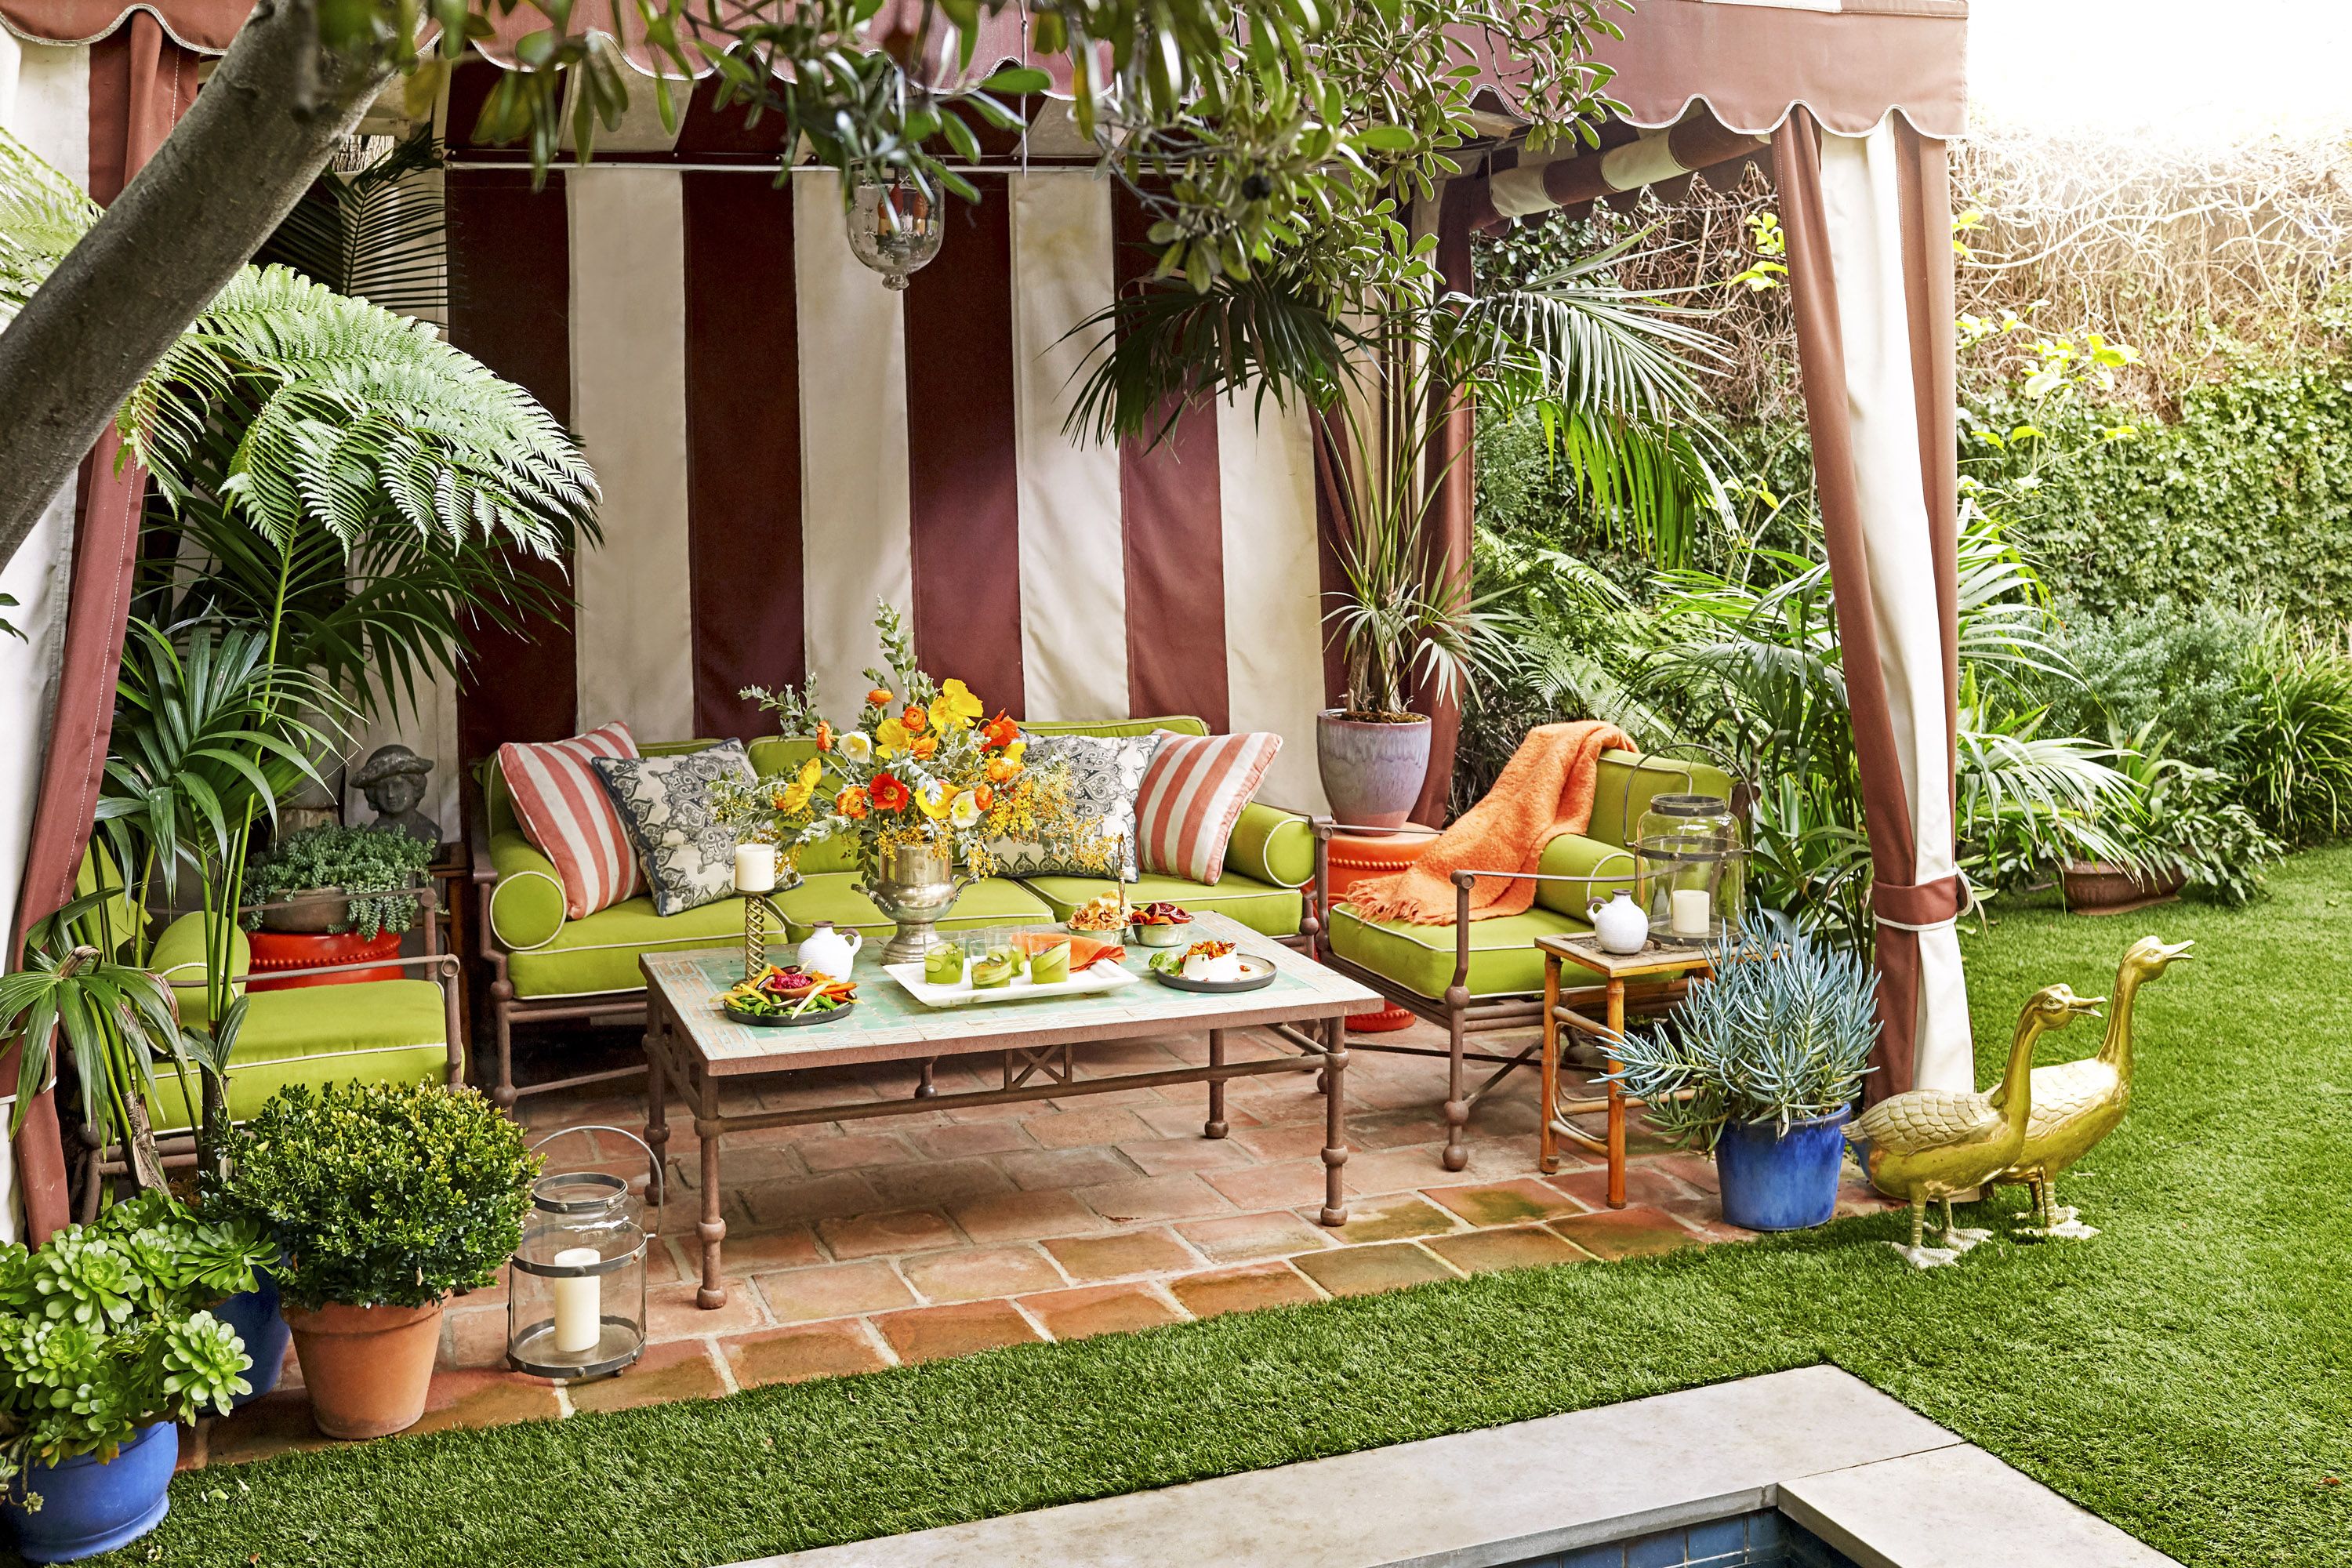 10 Outdoor Party Ideas How To Throw A Backyard Party